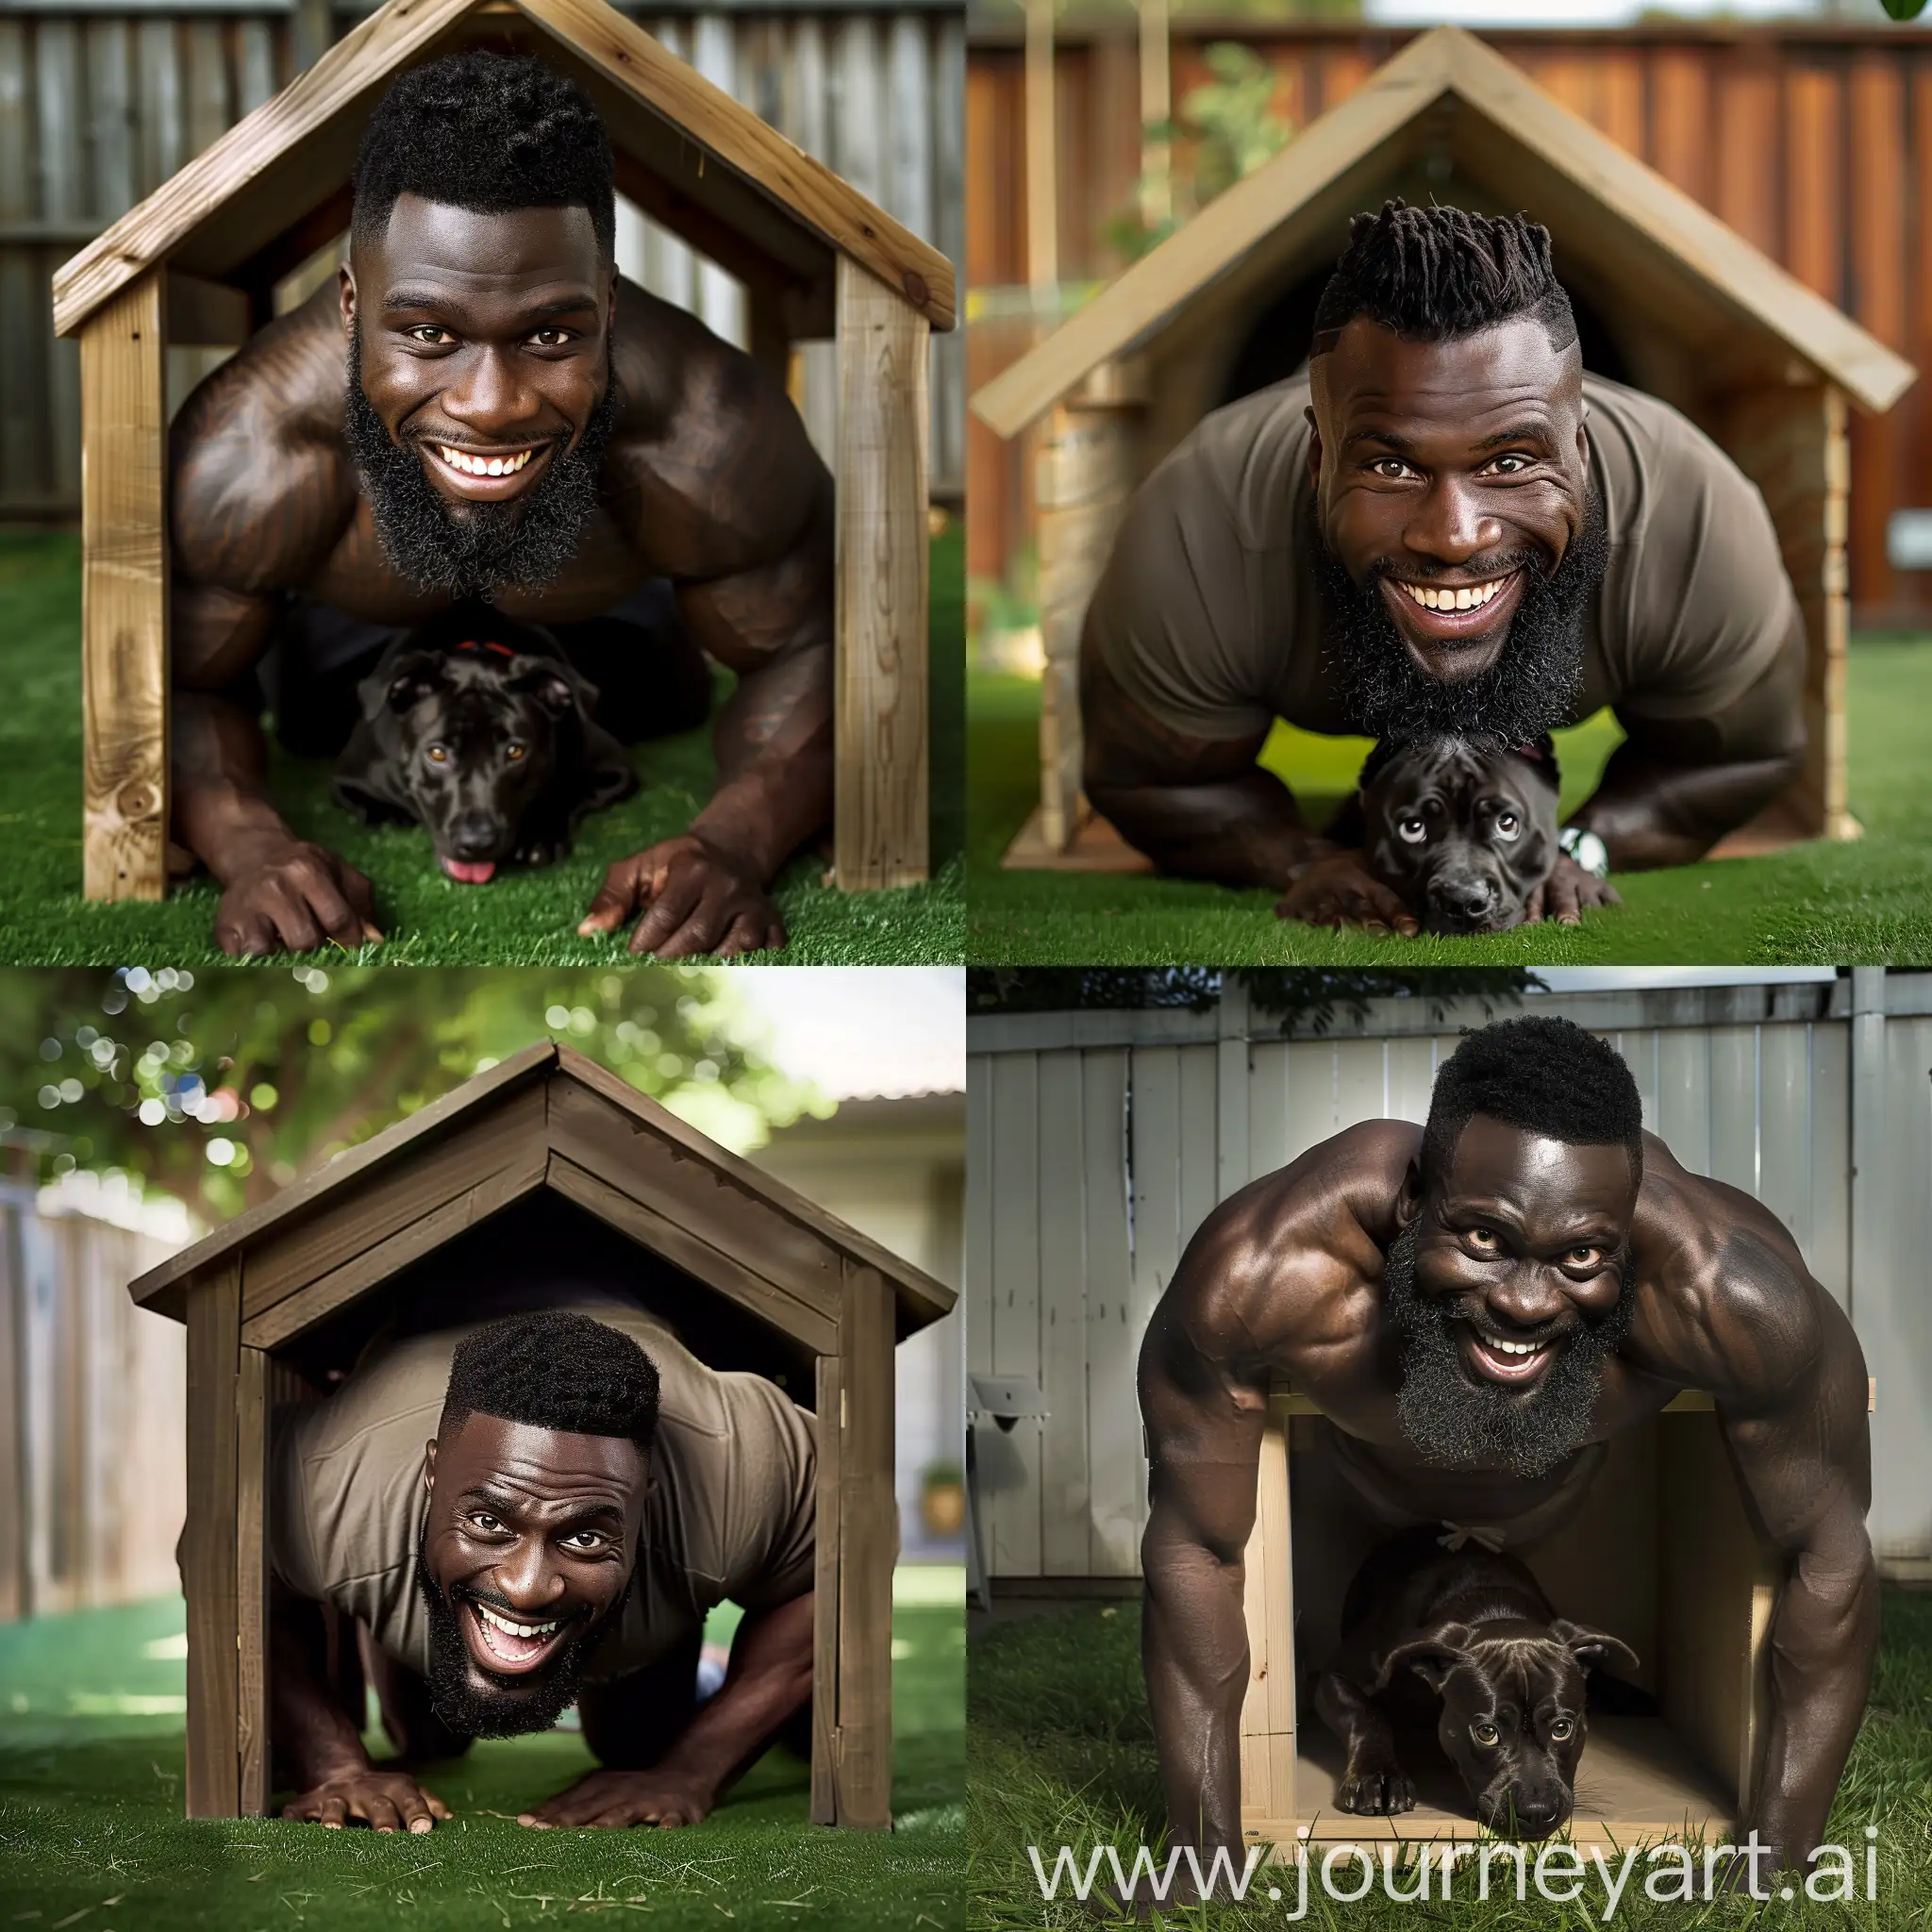 a handsome dark skinned muscular burly man with his eyes white rolling back, good looking bearded black man smiling happy face, burly muscular man crawling on all fours inside a dog house, man inside a small dog house, backyard background, grass floor, beautiful day